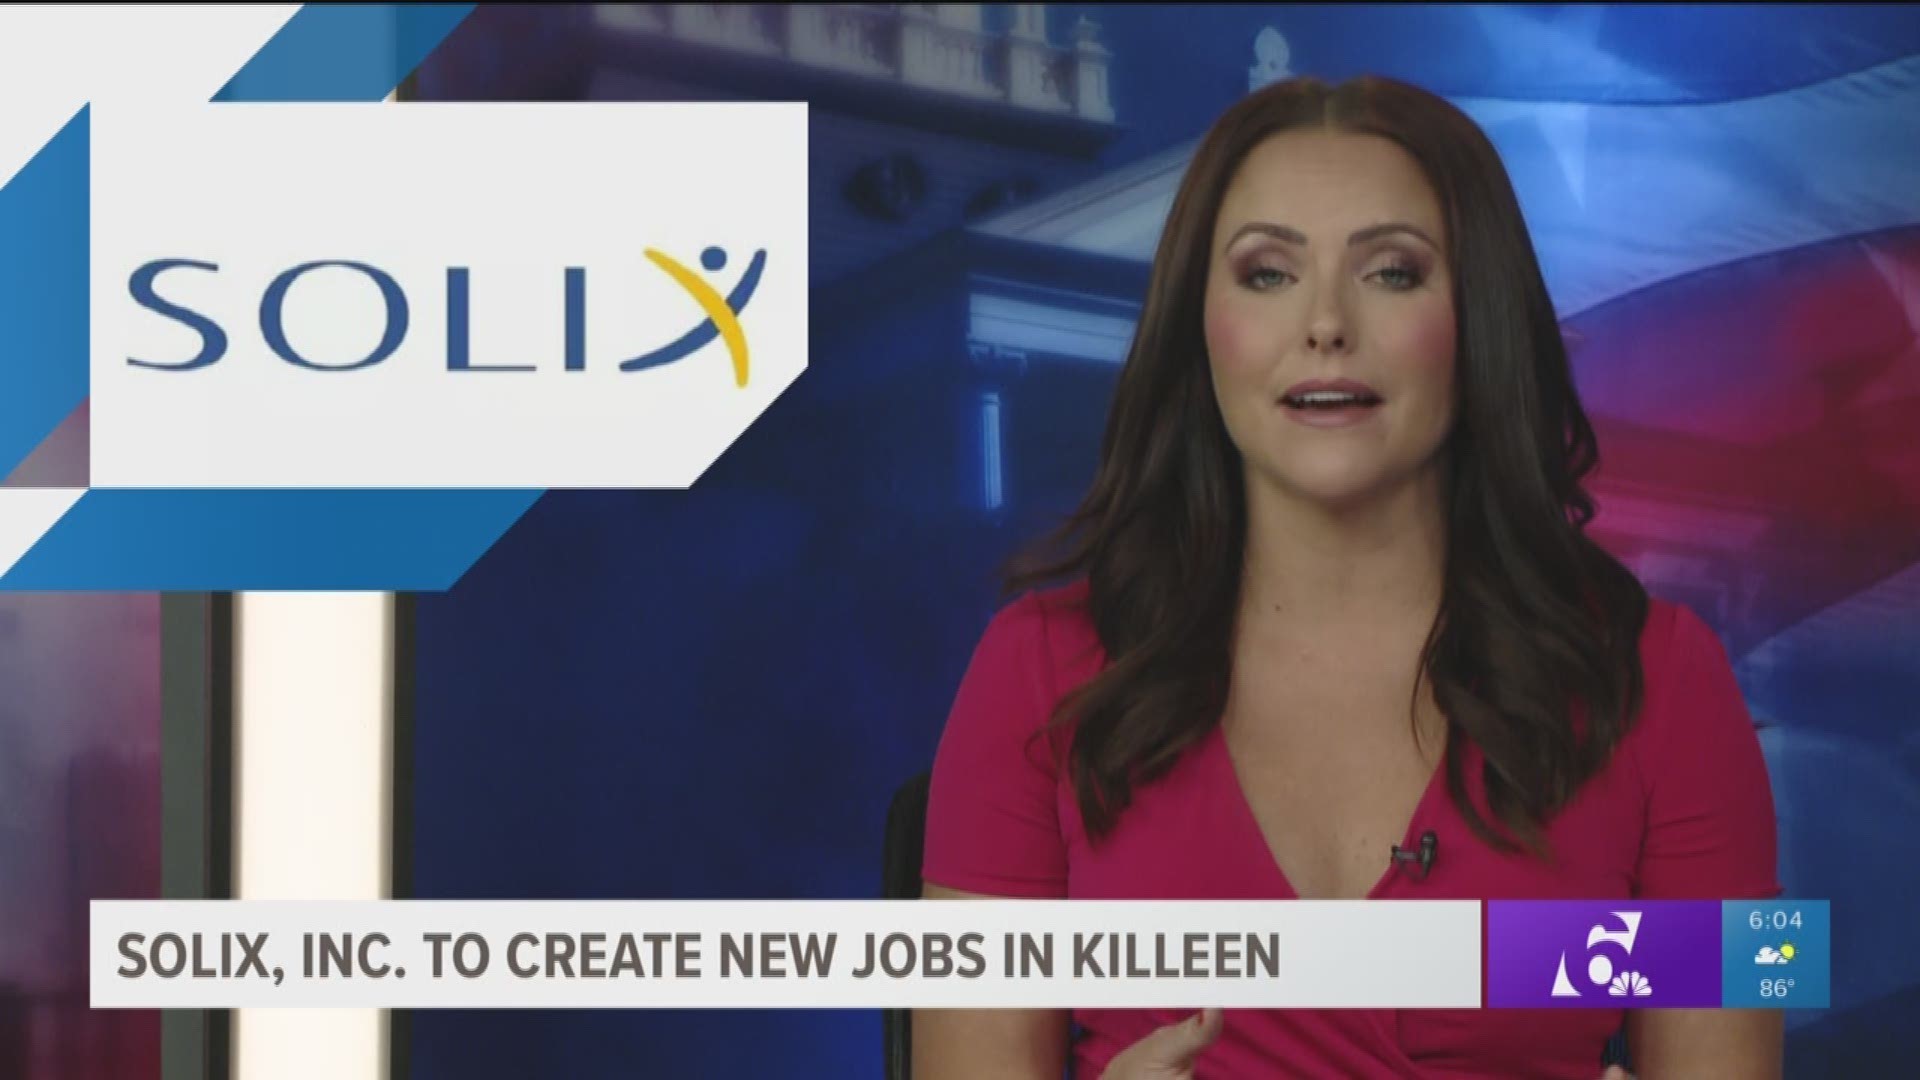 New jobs are coming to Killeen. 